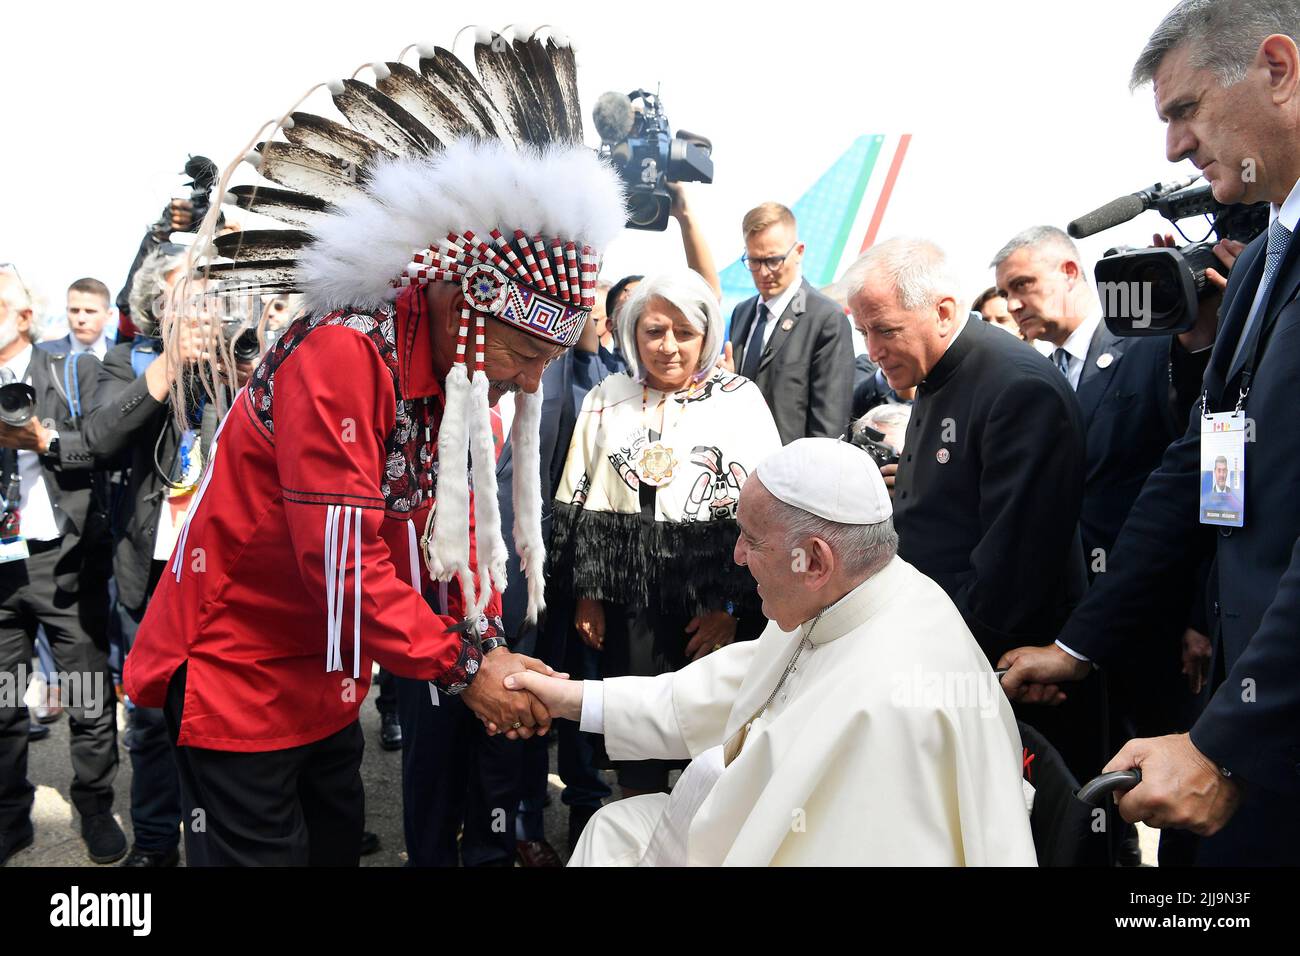 Vatican, Vatican. 24th July, 2022. Canada, Alberta, 2022/07/24 Pope Francis meets members of an indigenous tribe during his welcoming ceremony at Edmonton International Airport in Alberta, western Canada Photograph by Vatican Mediia/Catholic Press Photo. RESTRICTED TO EDITORIAL USE - NO MARKETING - NO ADVERTISING CAMPAIGNS. Credit: Independent Photo Agency/Alamy Live News Stock Photo